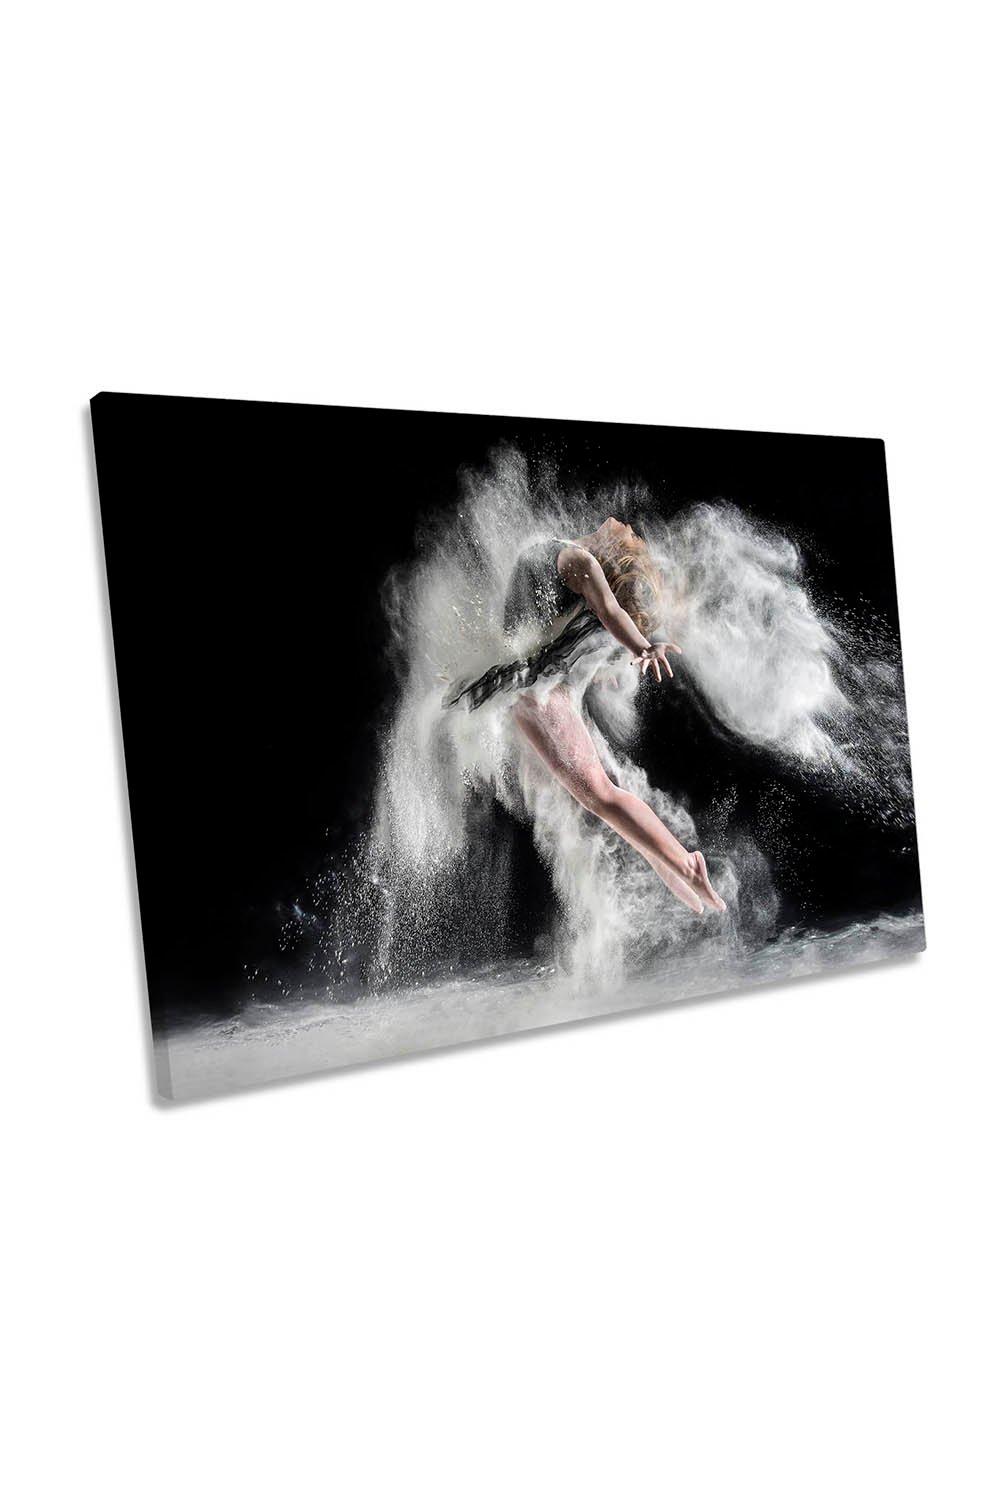 Frenzy Female Dancer Performer Canvas Wall Art Picture Print